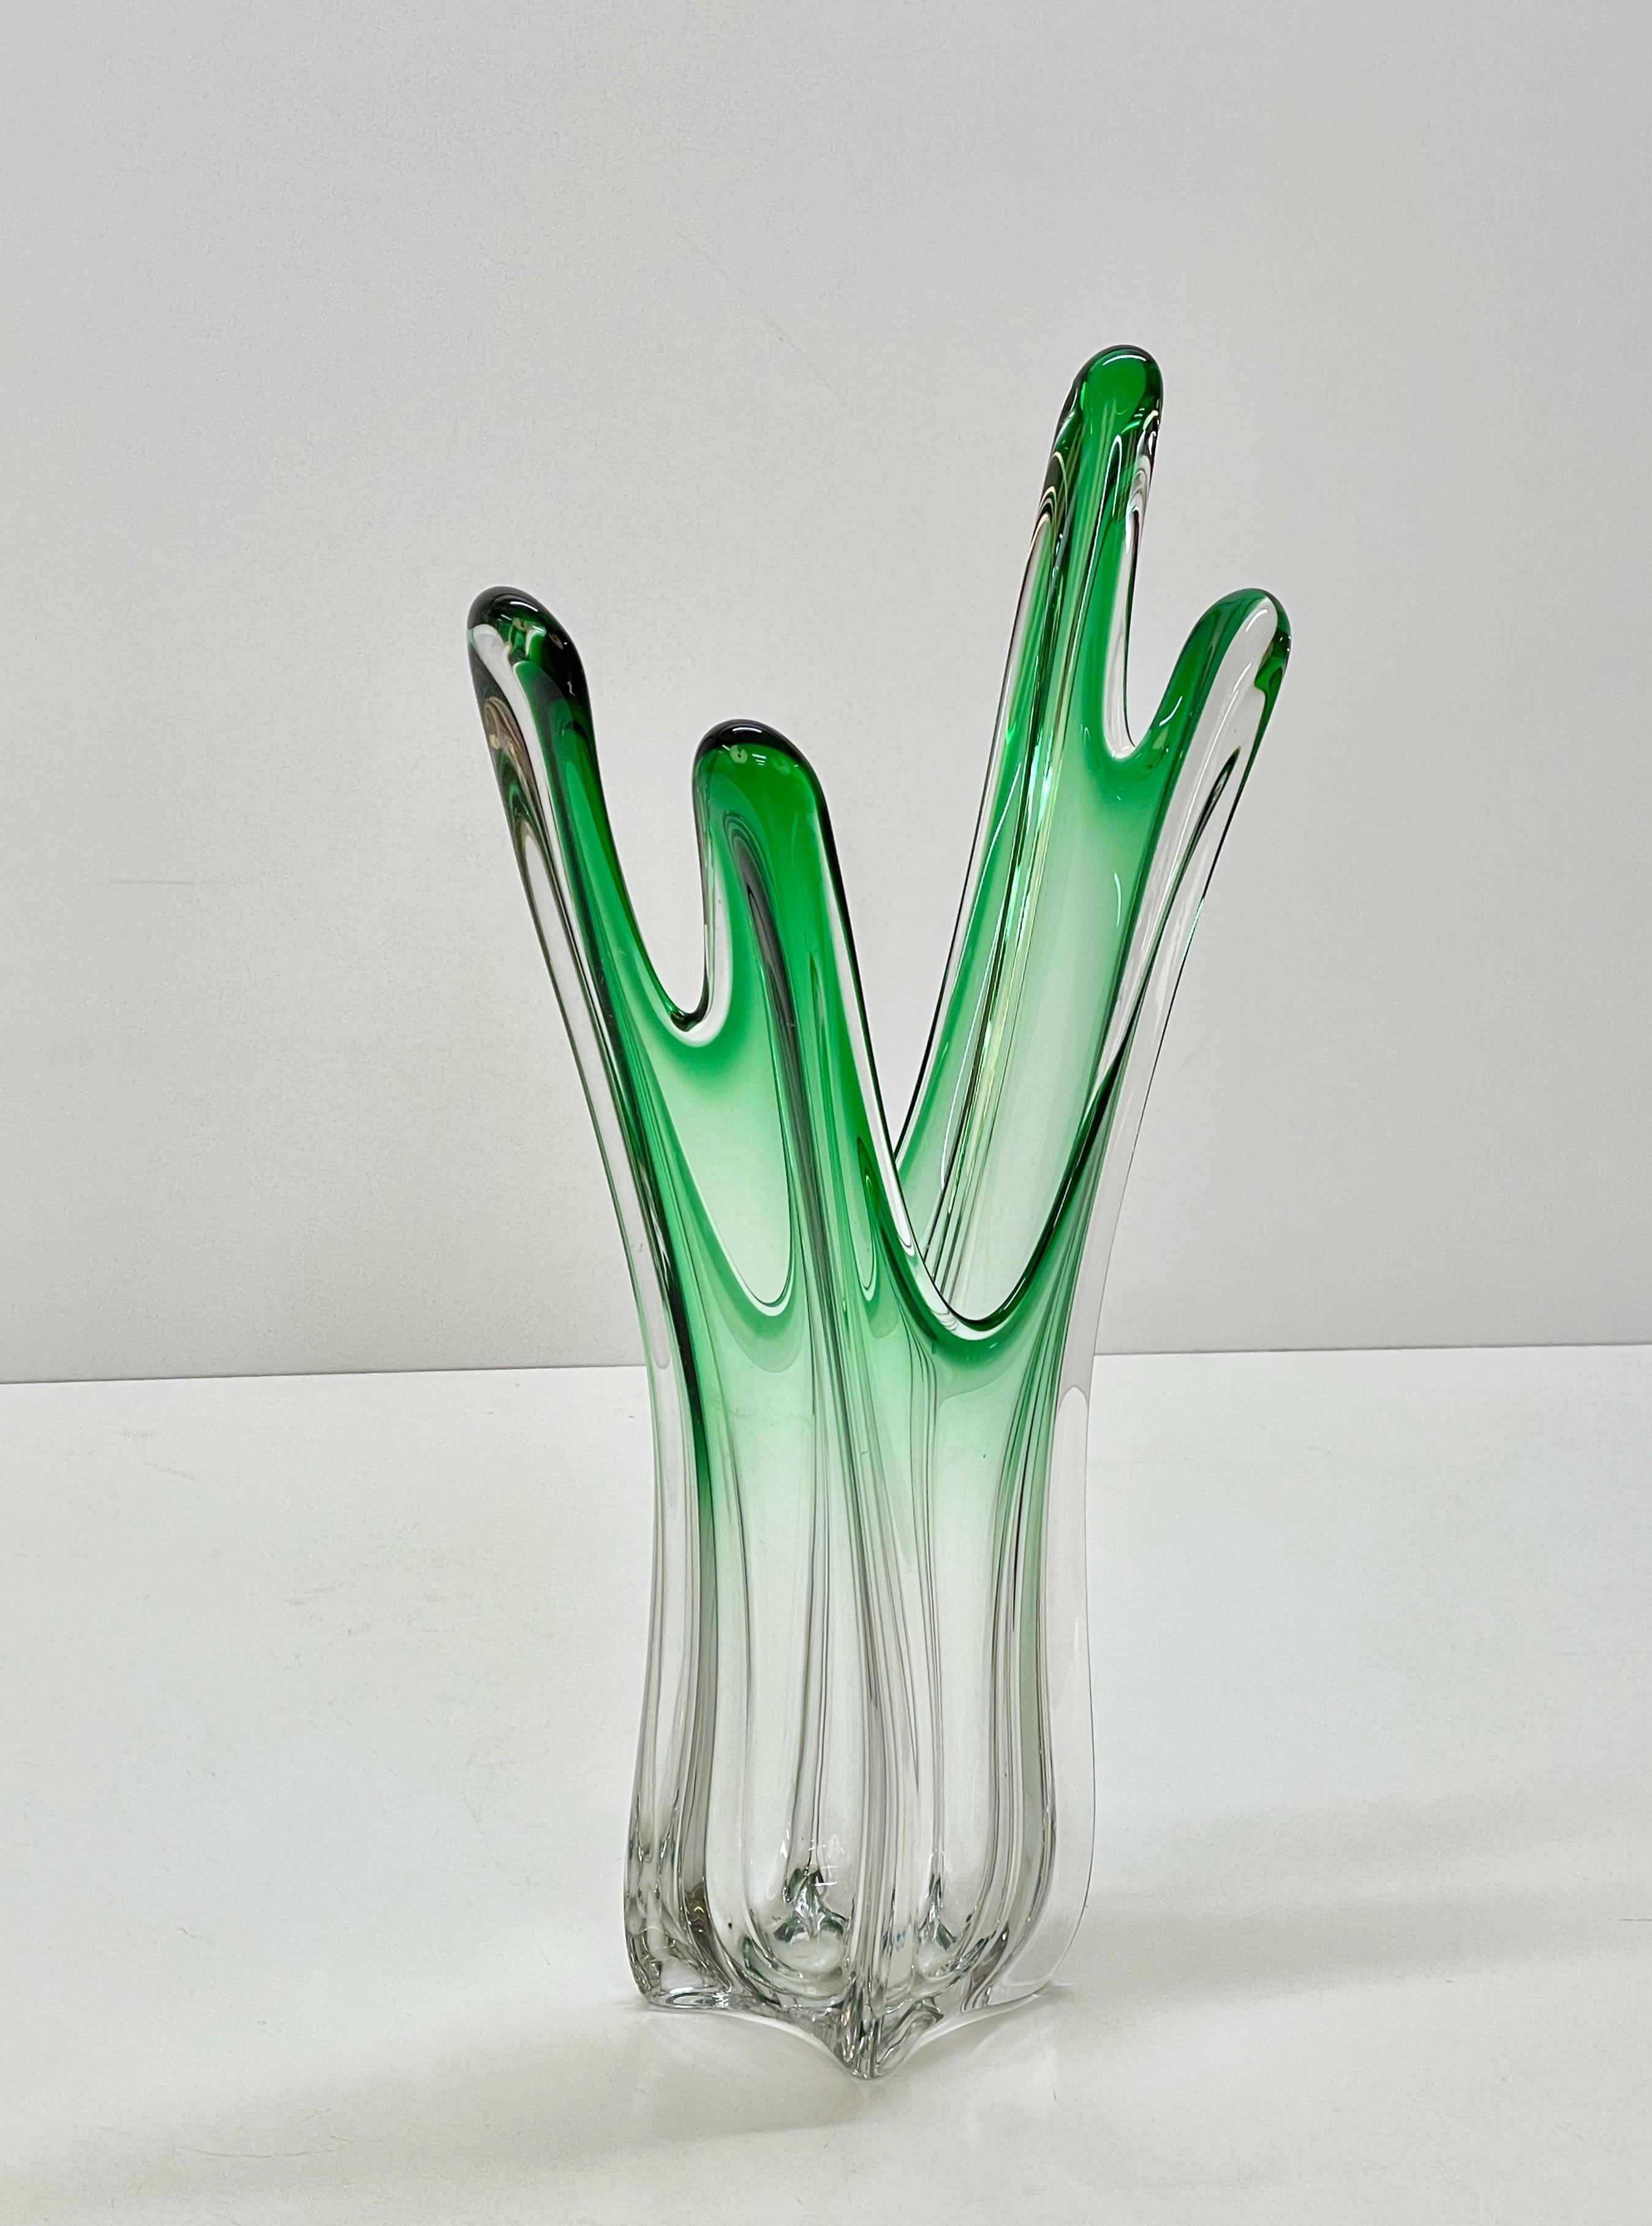 Midcentury Green Art Murano Glass Italian Vase Attributed to F.lli Toso, 1950s For Sale 8